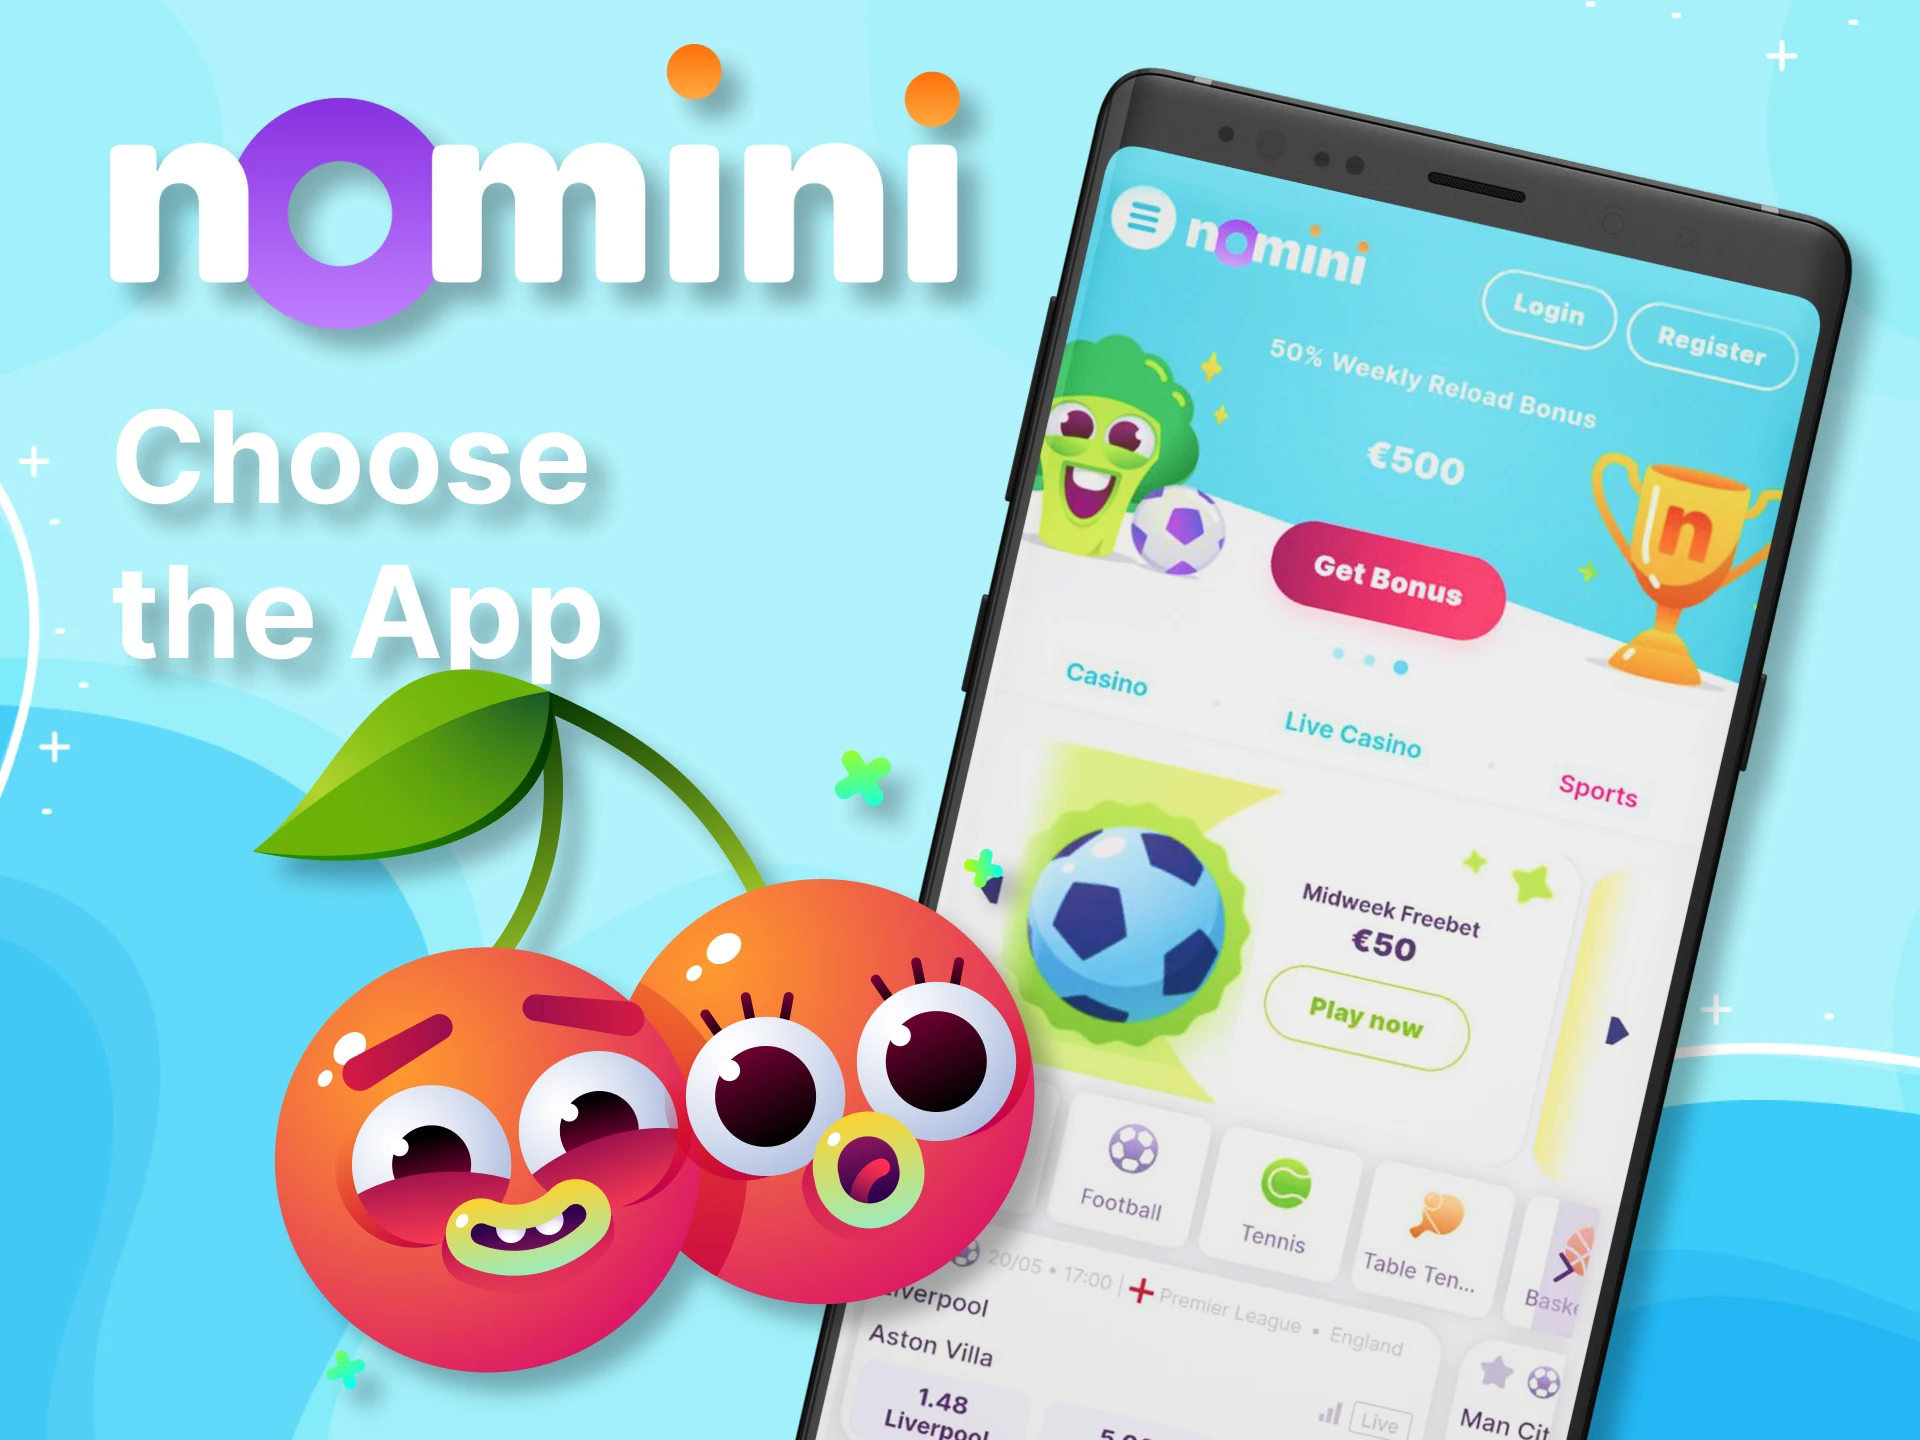 There are many reasons why you should choose the Nomini app.